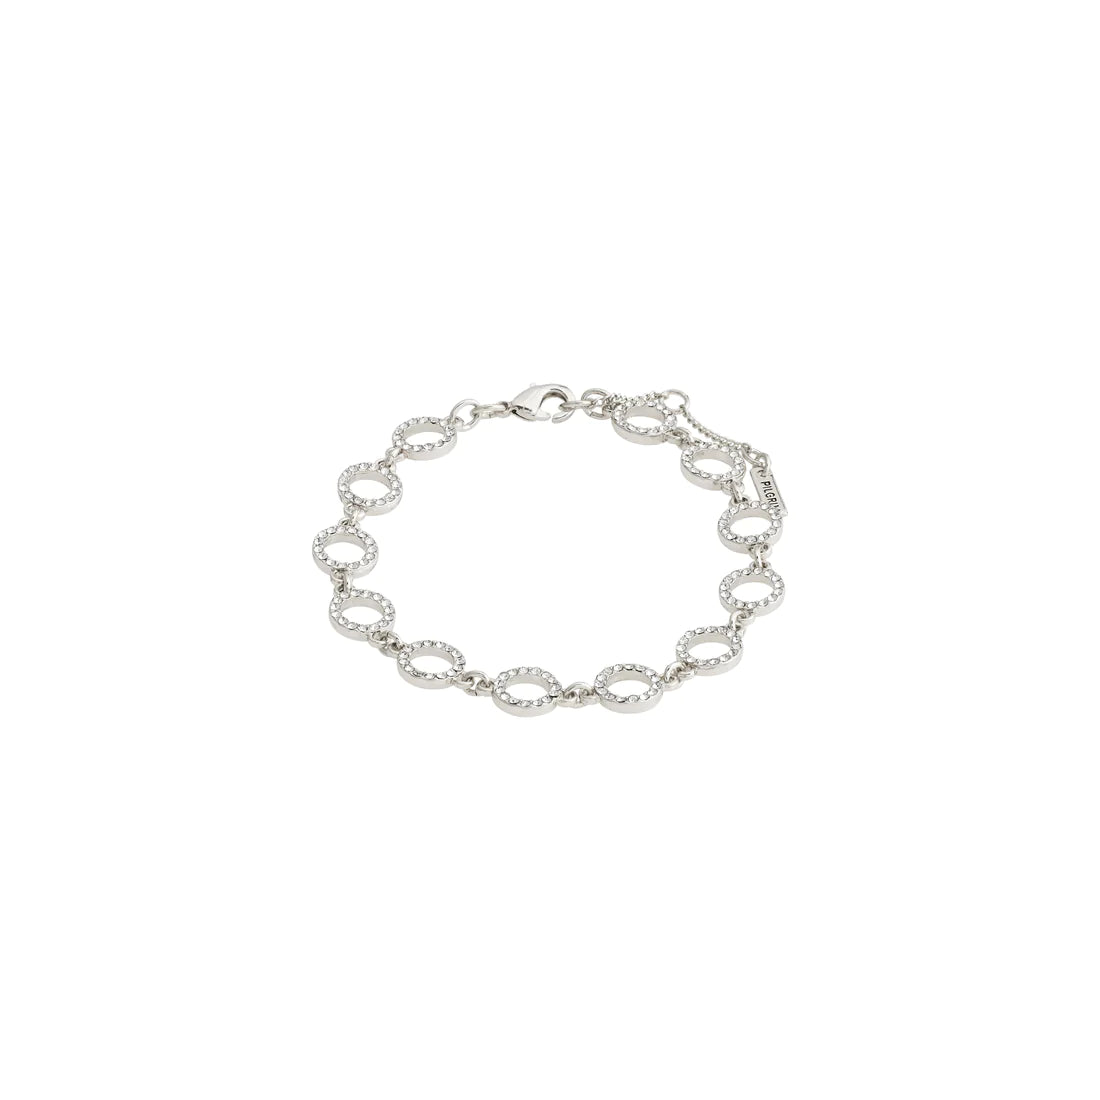 ROGUE recycled crystal halo bracelet